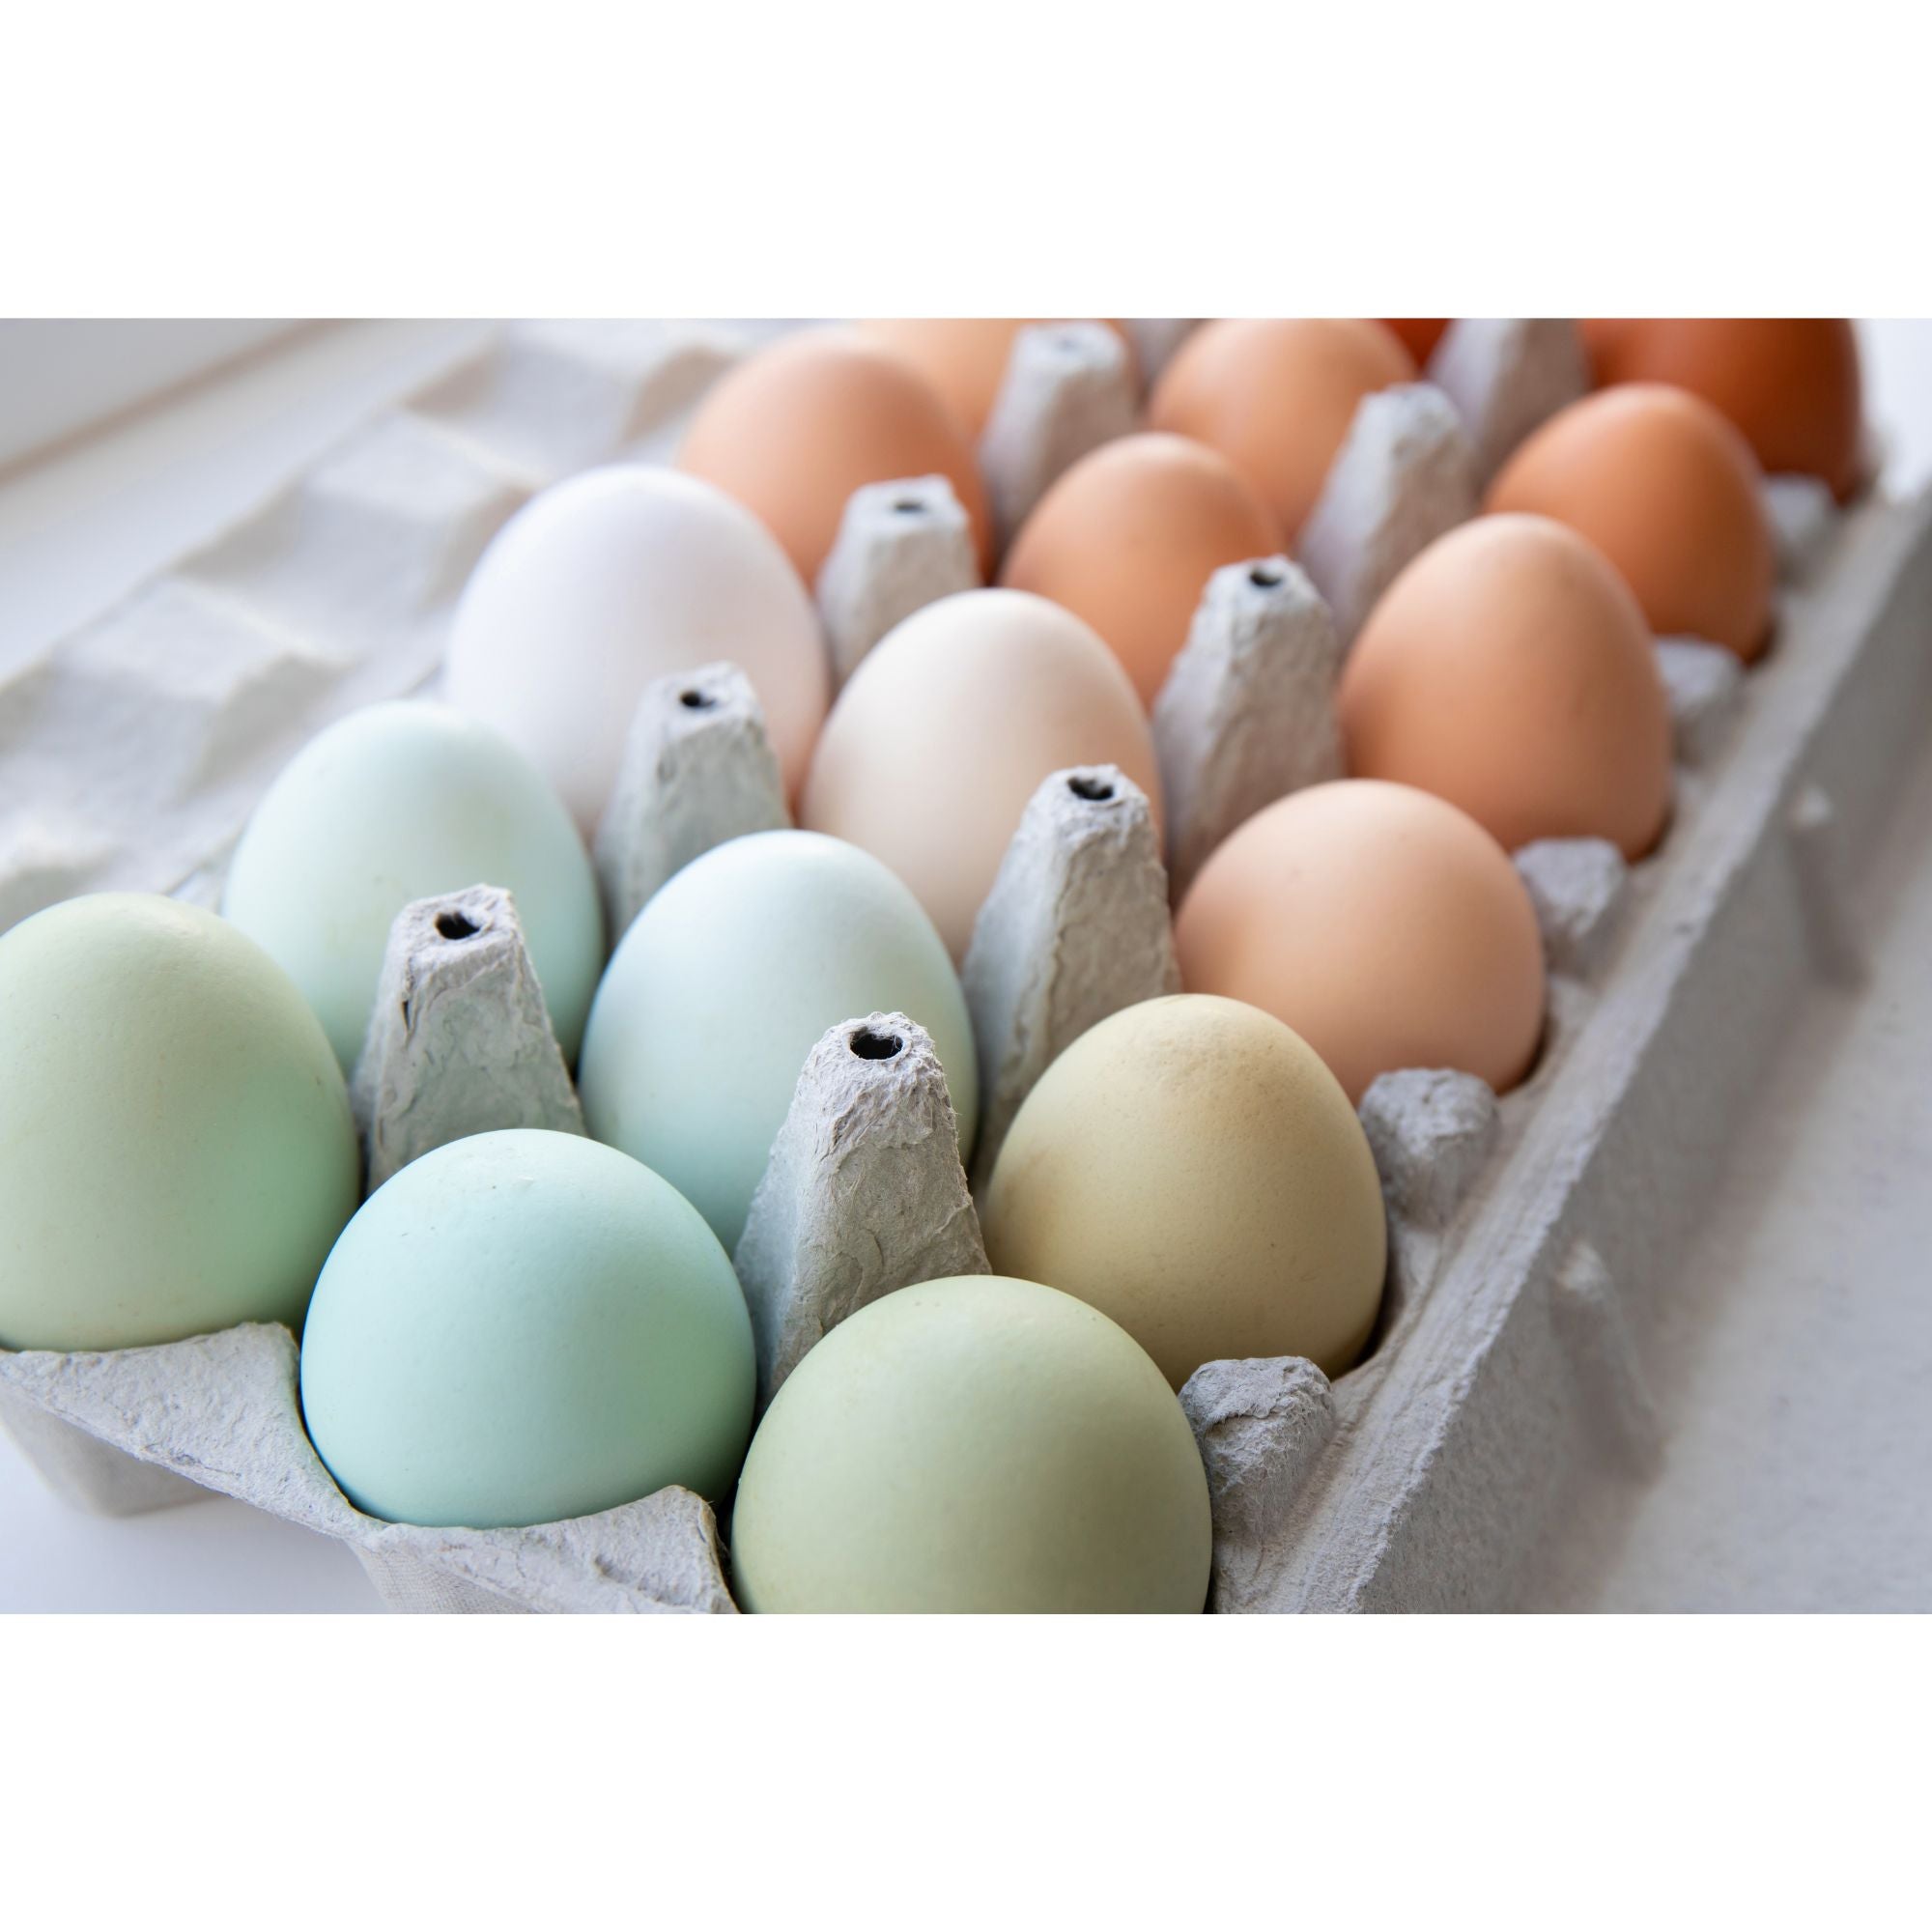 Are Farm-Fresh Eggs Safe for Consumption? - Homesteaders of America